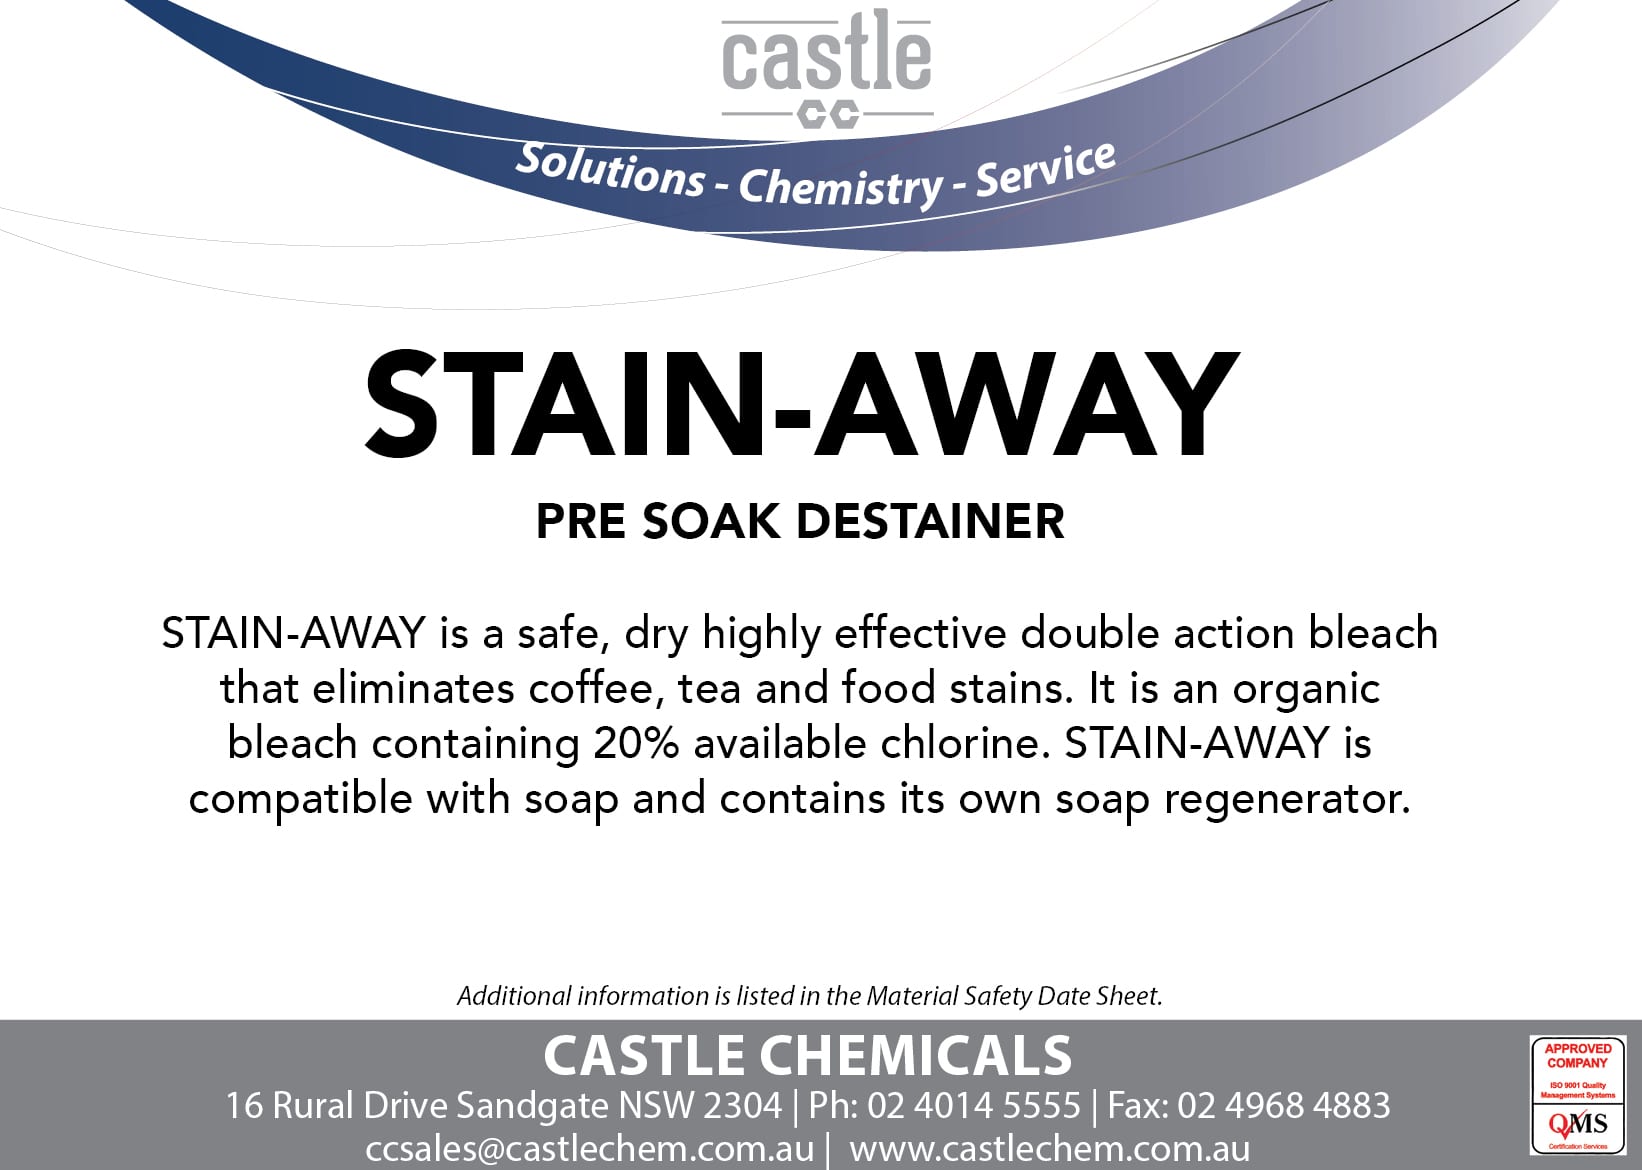 STAIN-AWAY